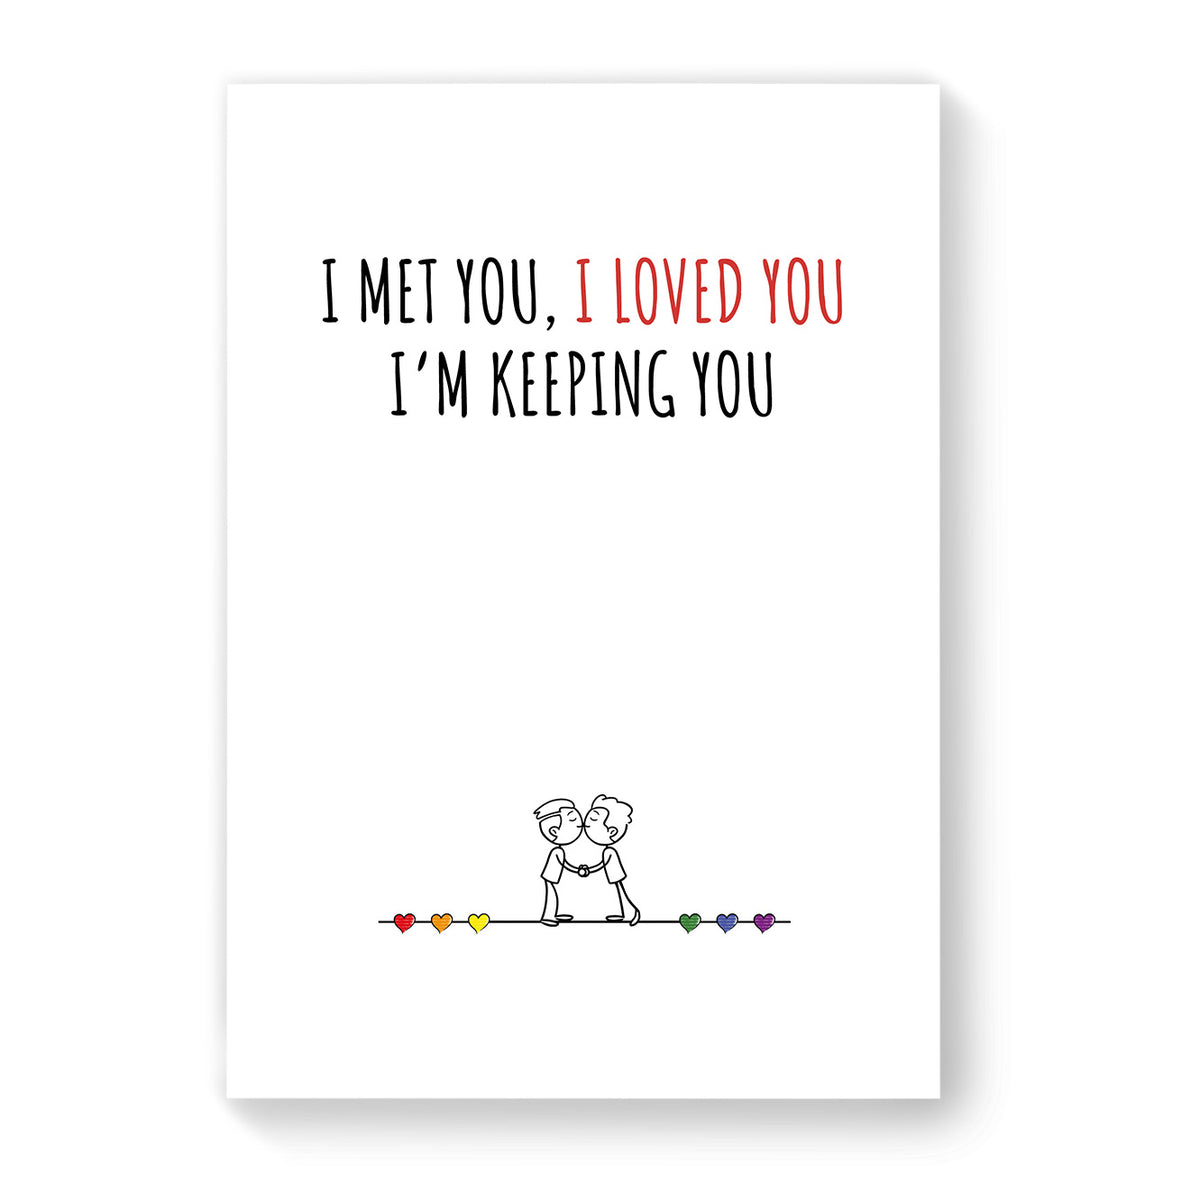 I met you, I loved you - Gay Couple Card - White Minimalist | Gift